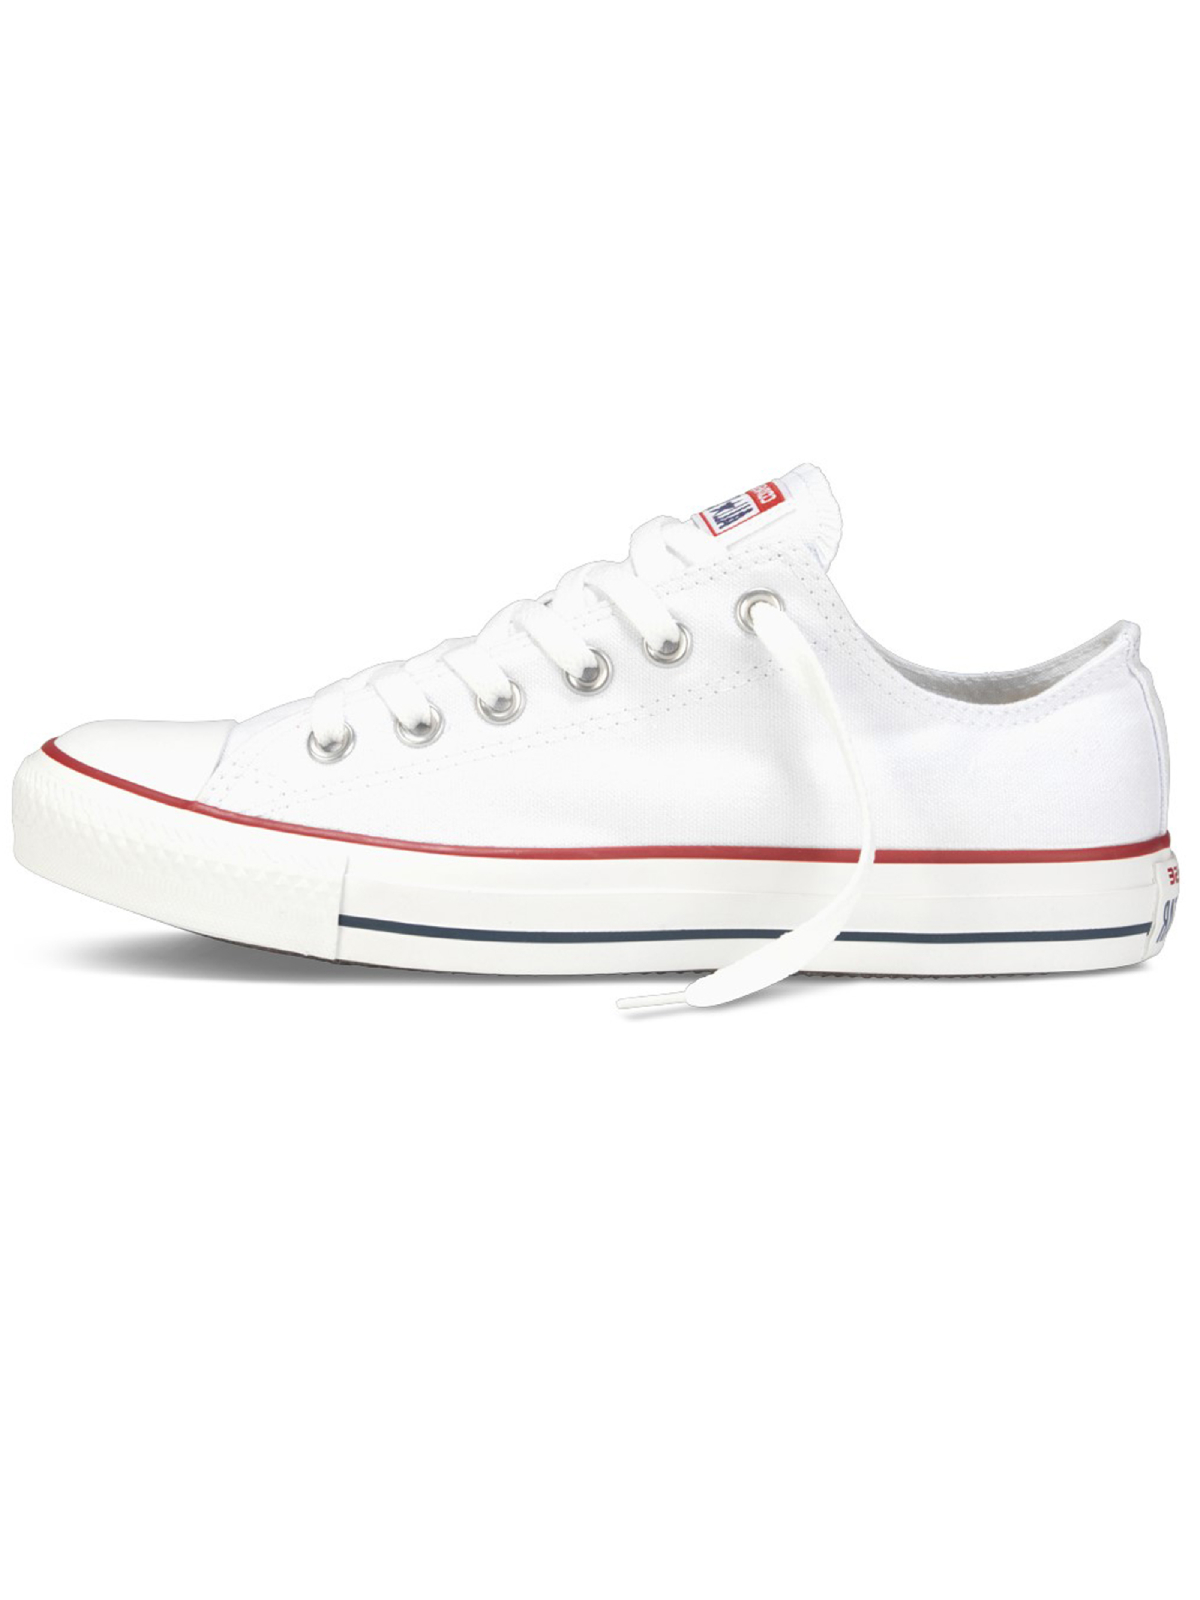 Unisex  Converse | All Star Chuck Taylor Ox | Unisex Shoes